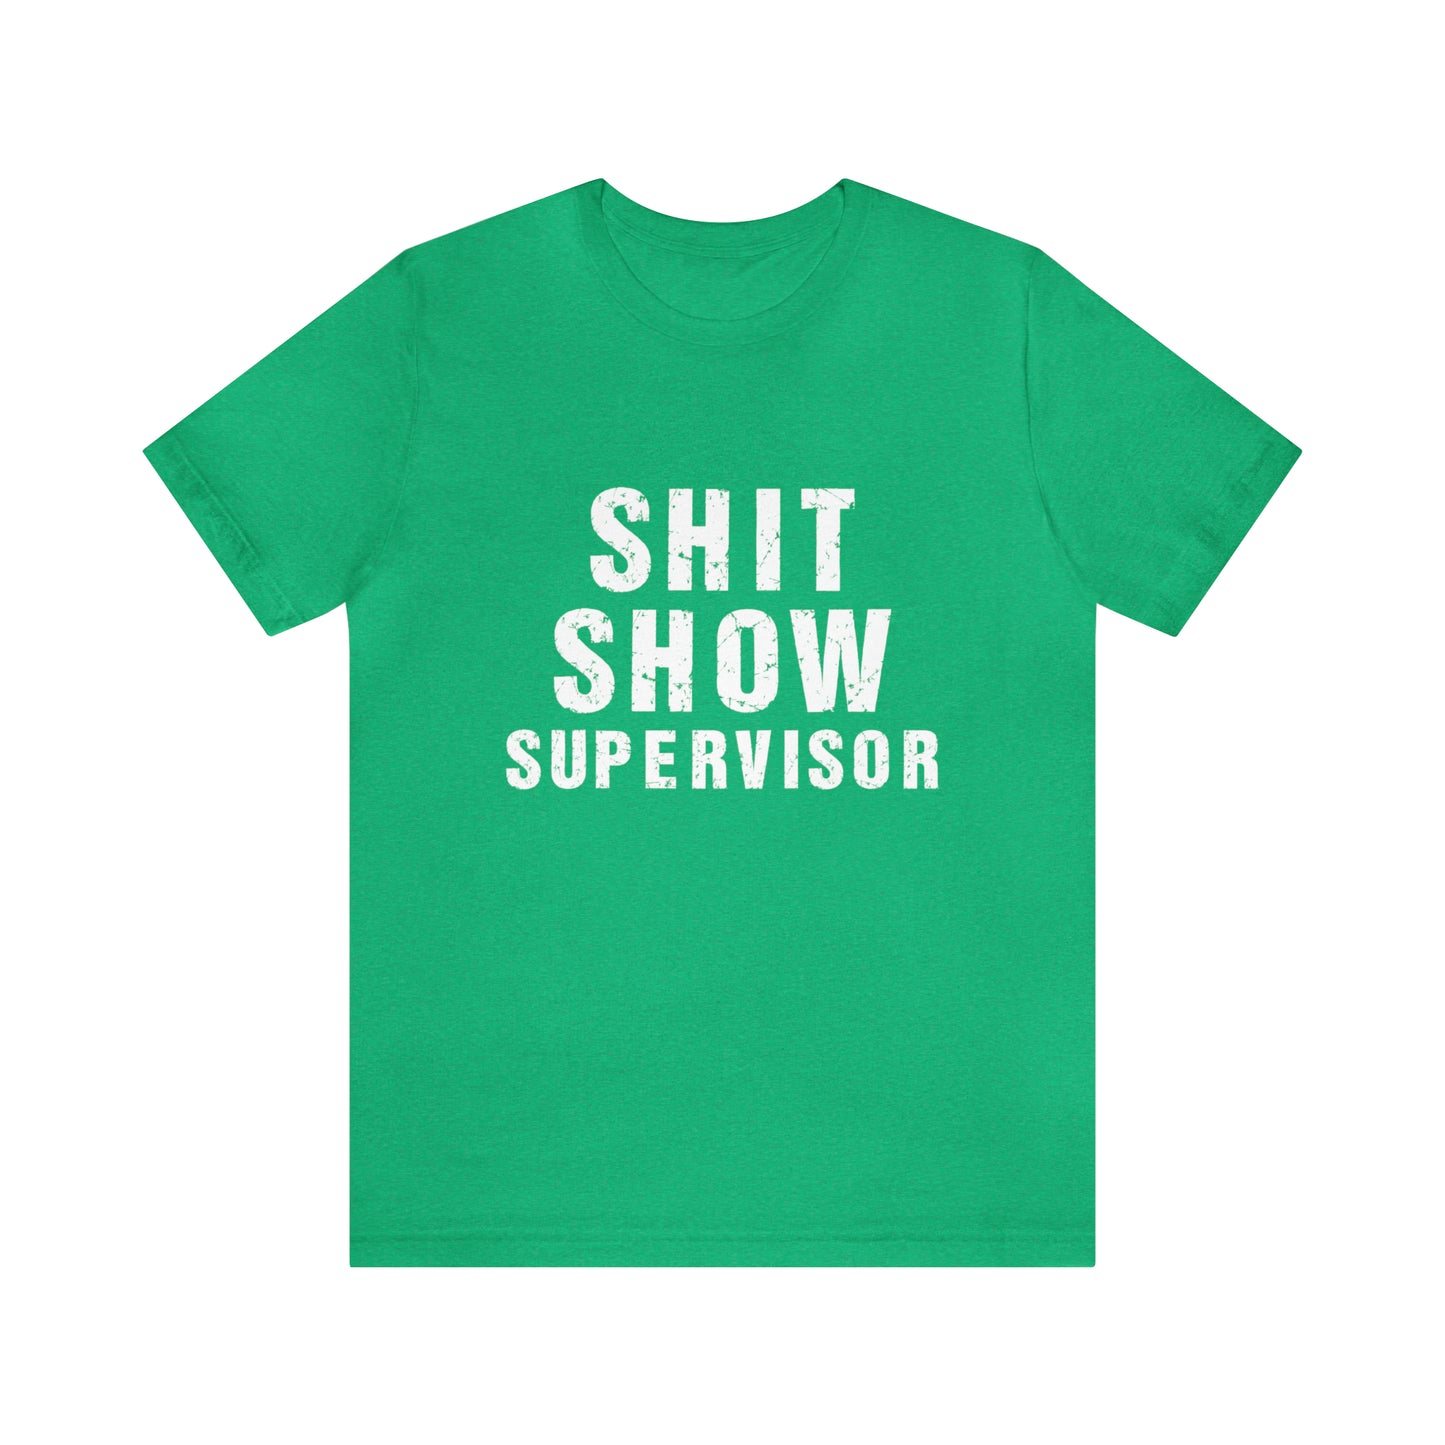 Shit Show Supervisor Tshirt, Funny Shirt, Fun Shirt, Gift for him, Gift for her, gift for a friend